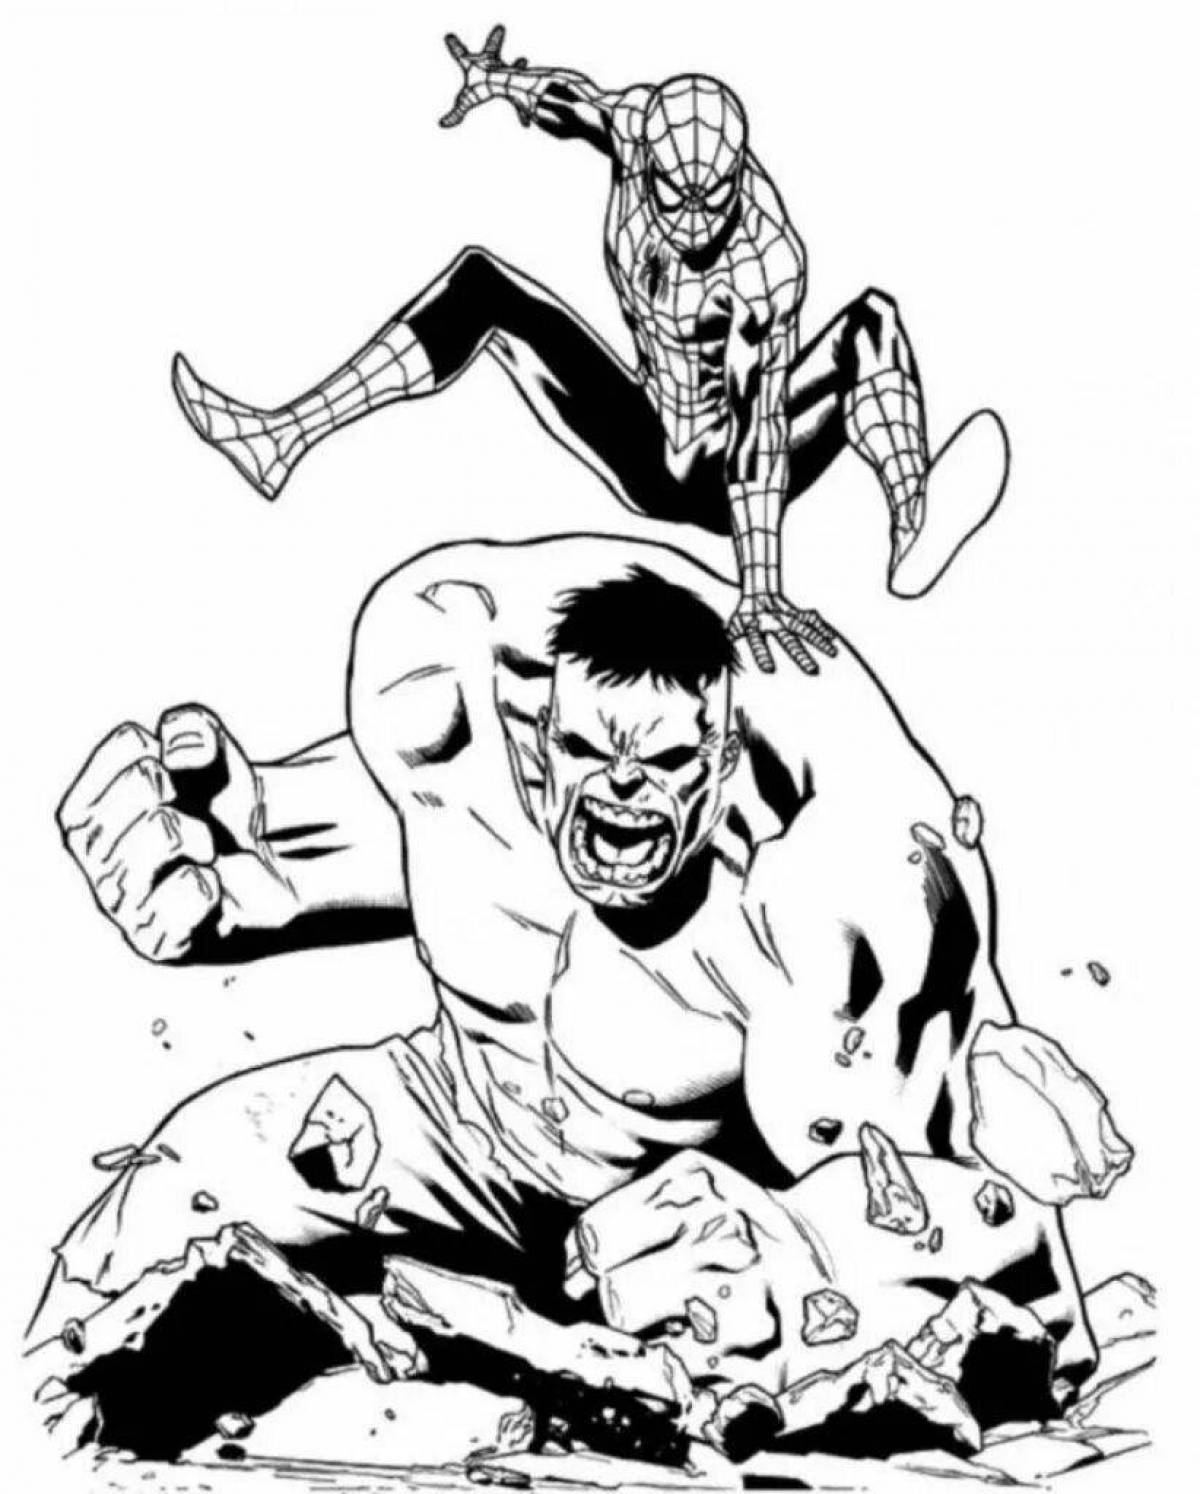 Playful hulk and spiderman coloring pages for kids